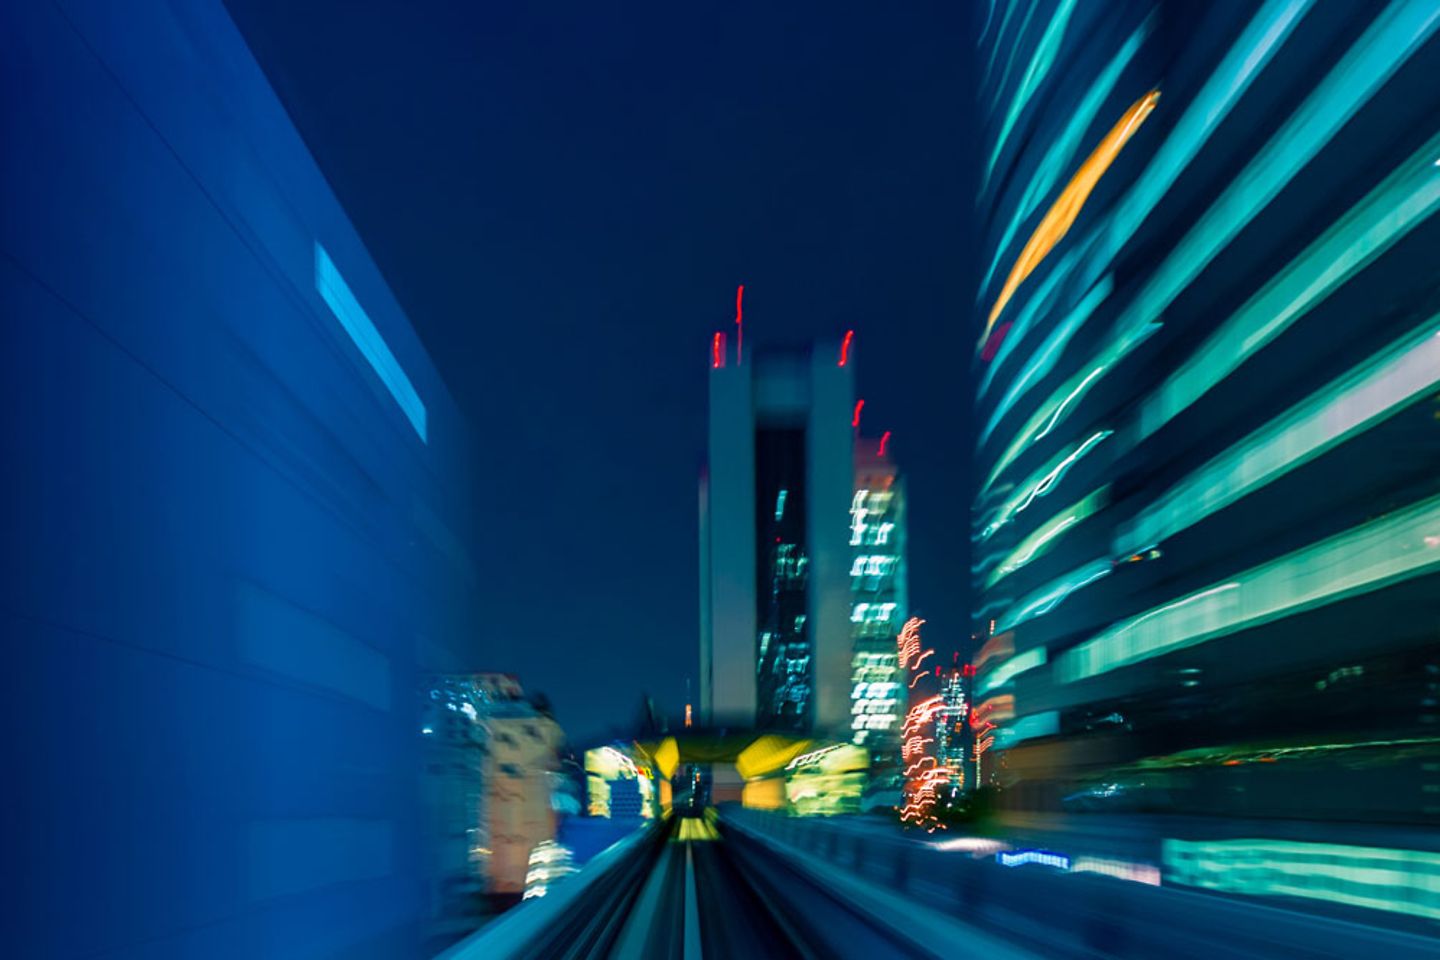 Abstract high speed technology POV train motion blurred concept from the Yuikamome monorail in Tokyo, Japan